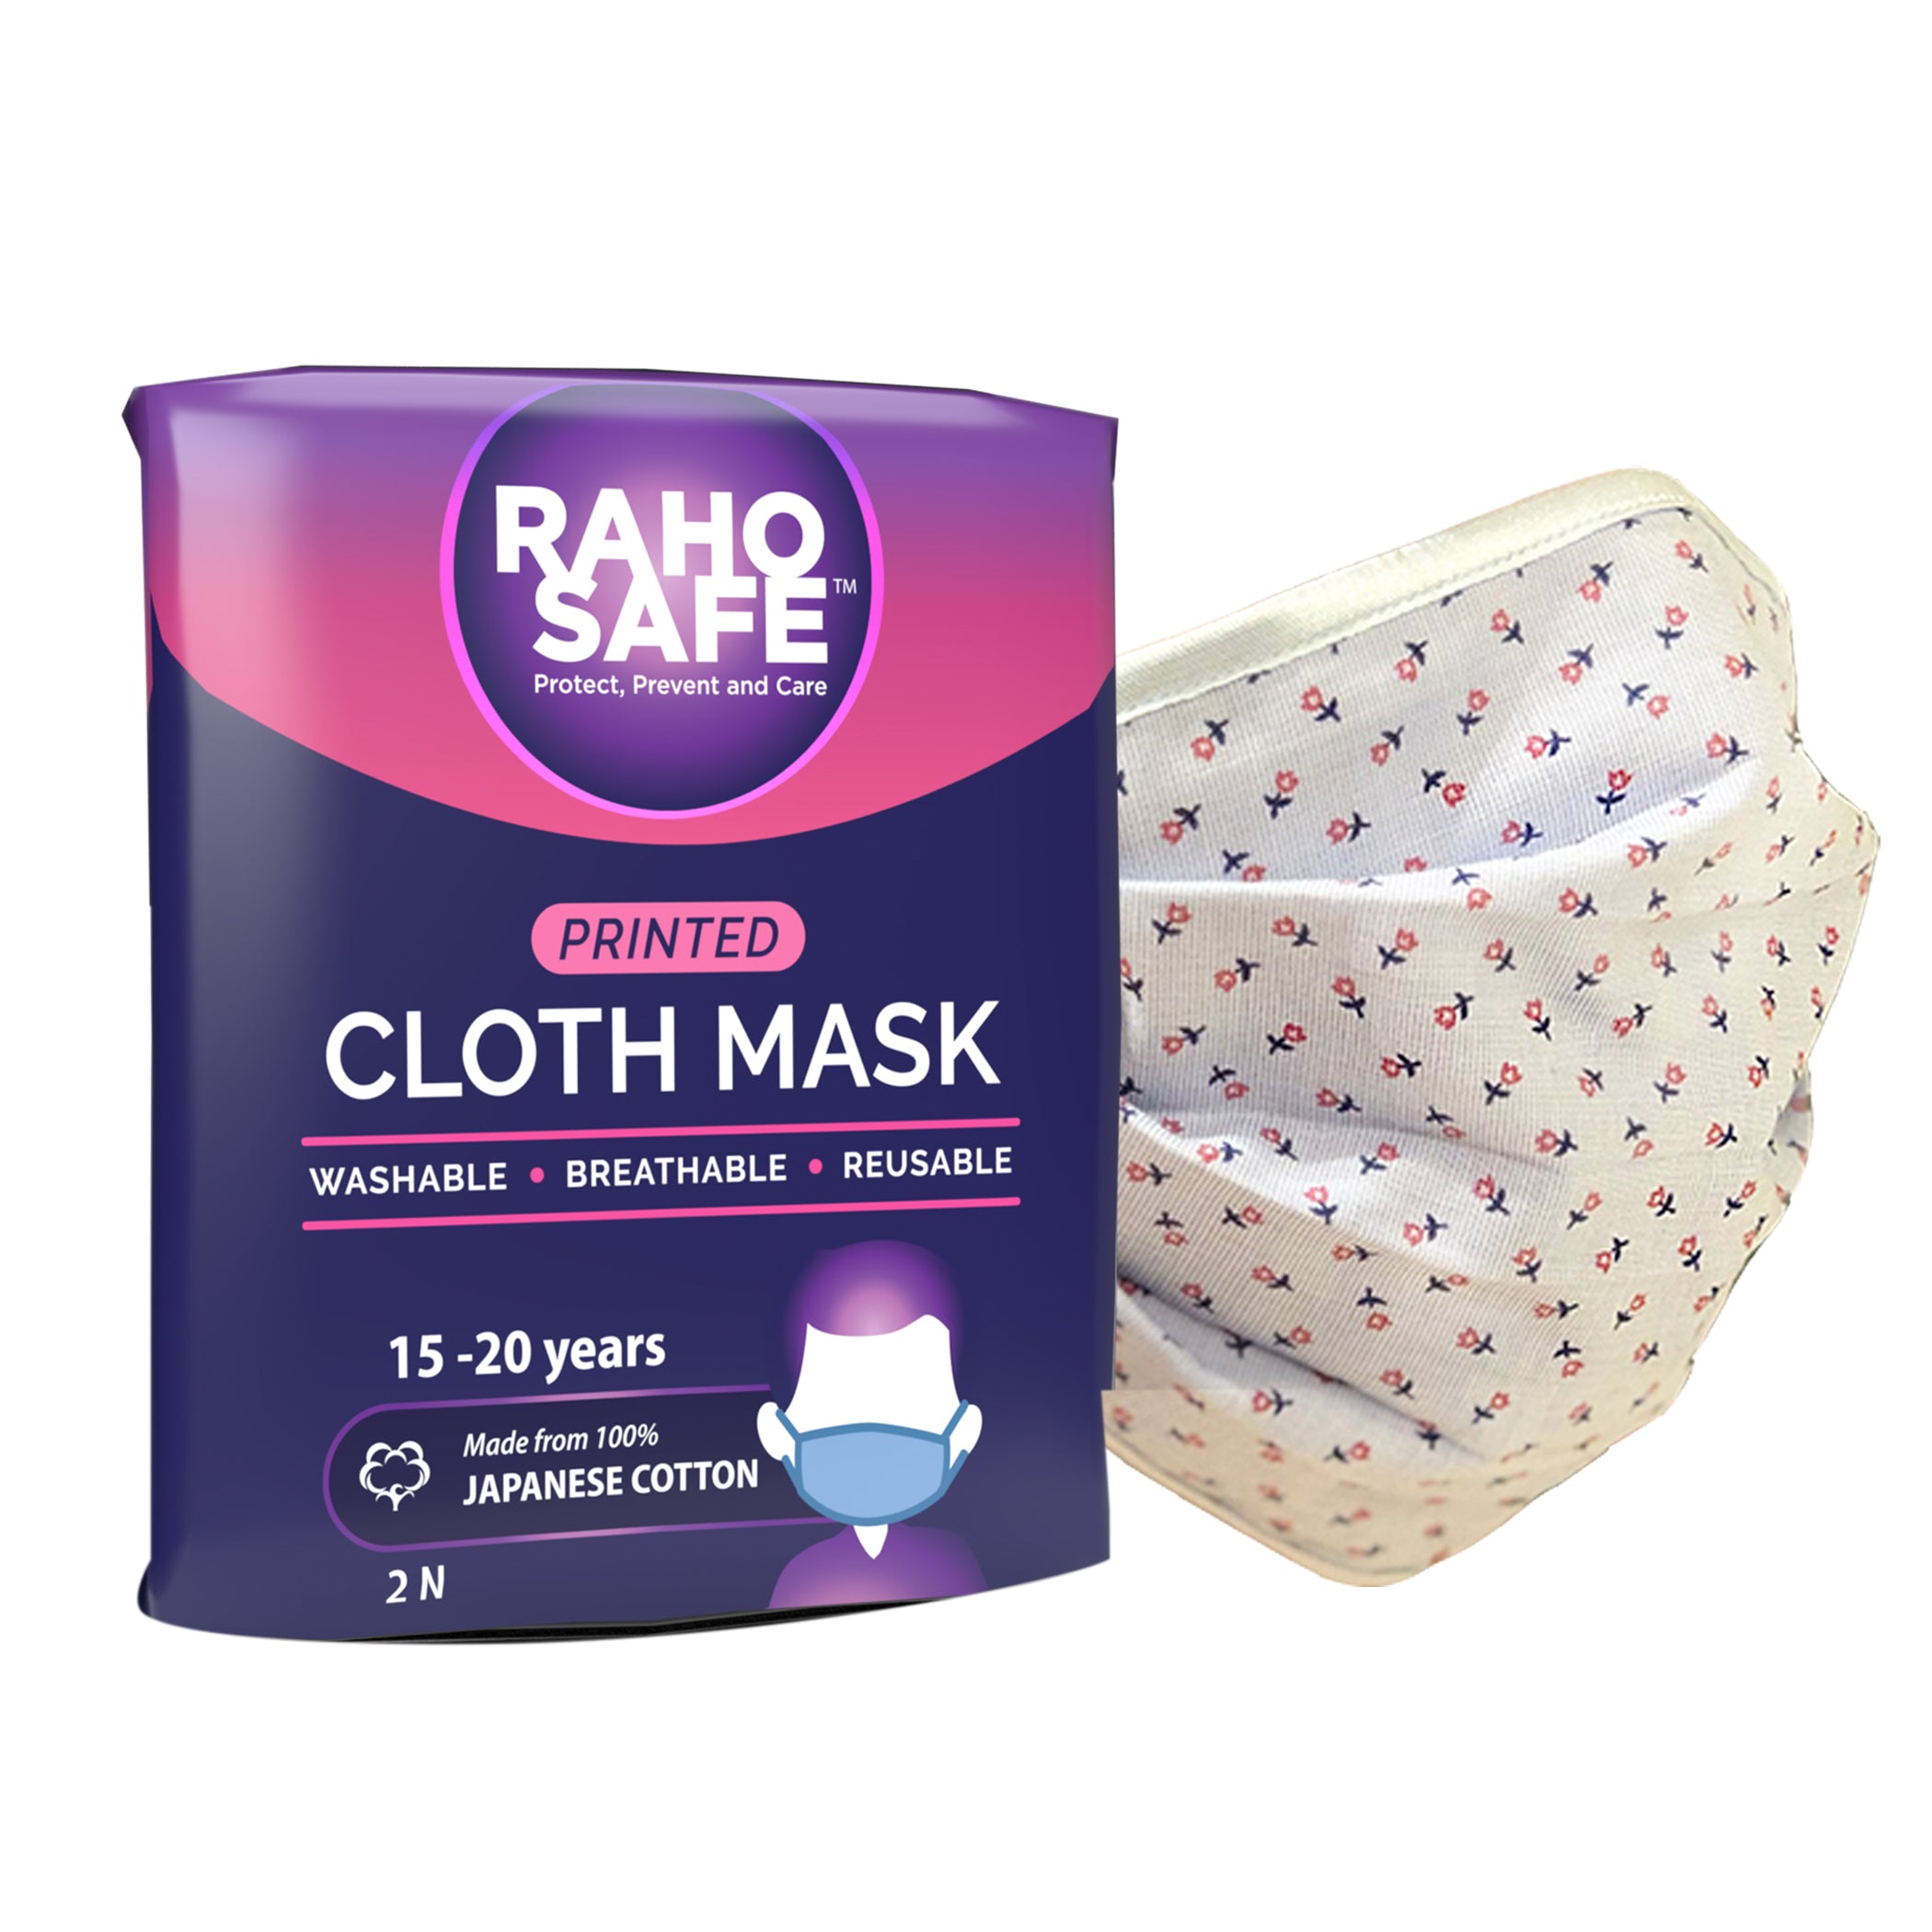 Printed Cloth Mask (Pack of 2) - Large